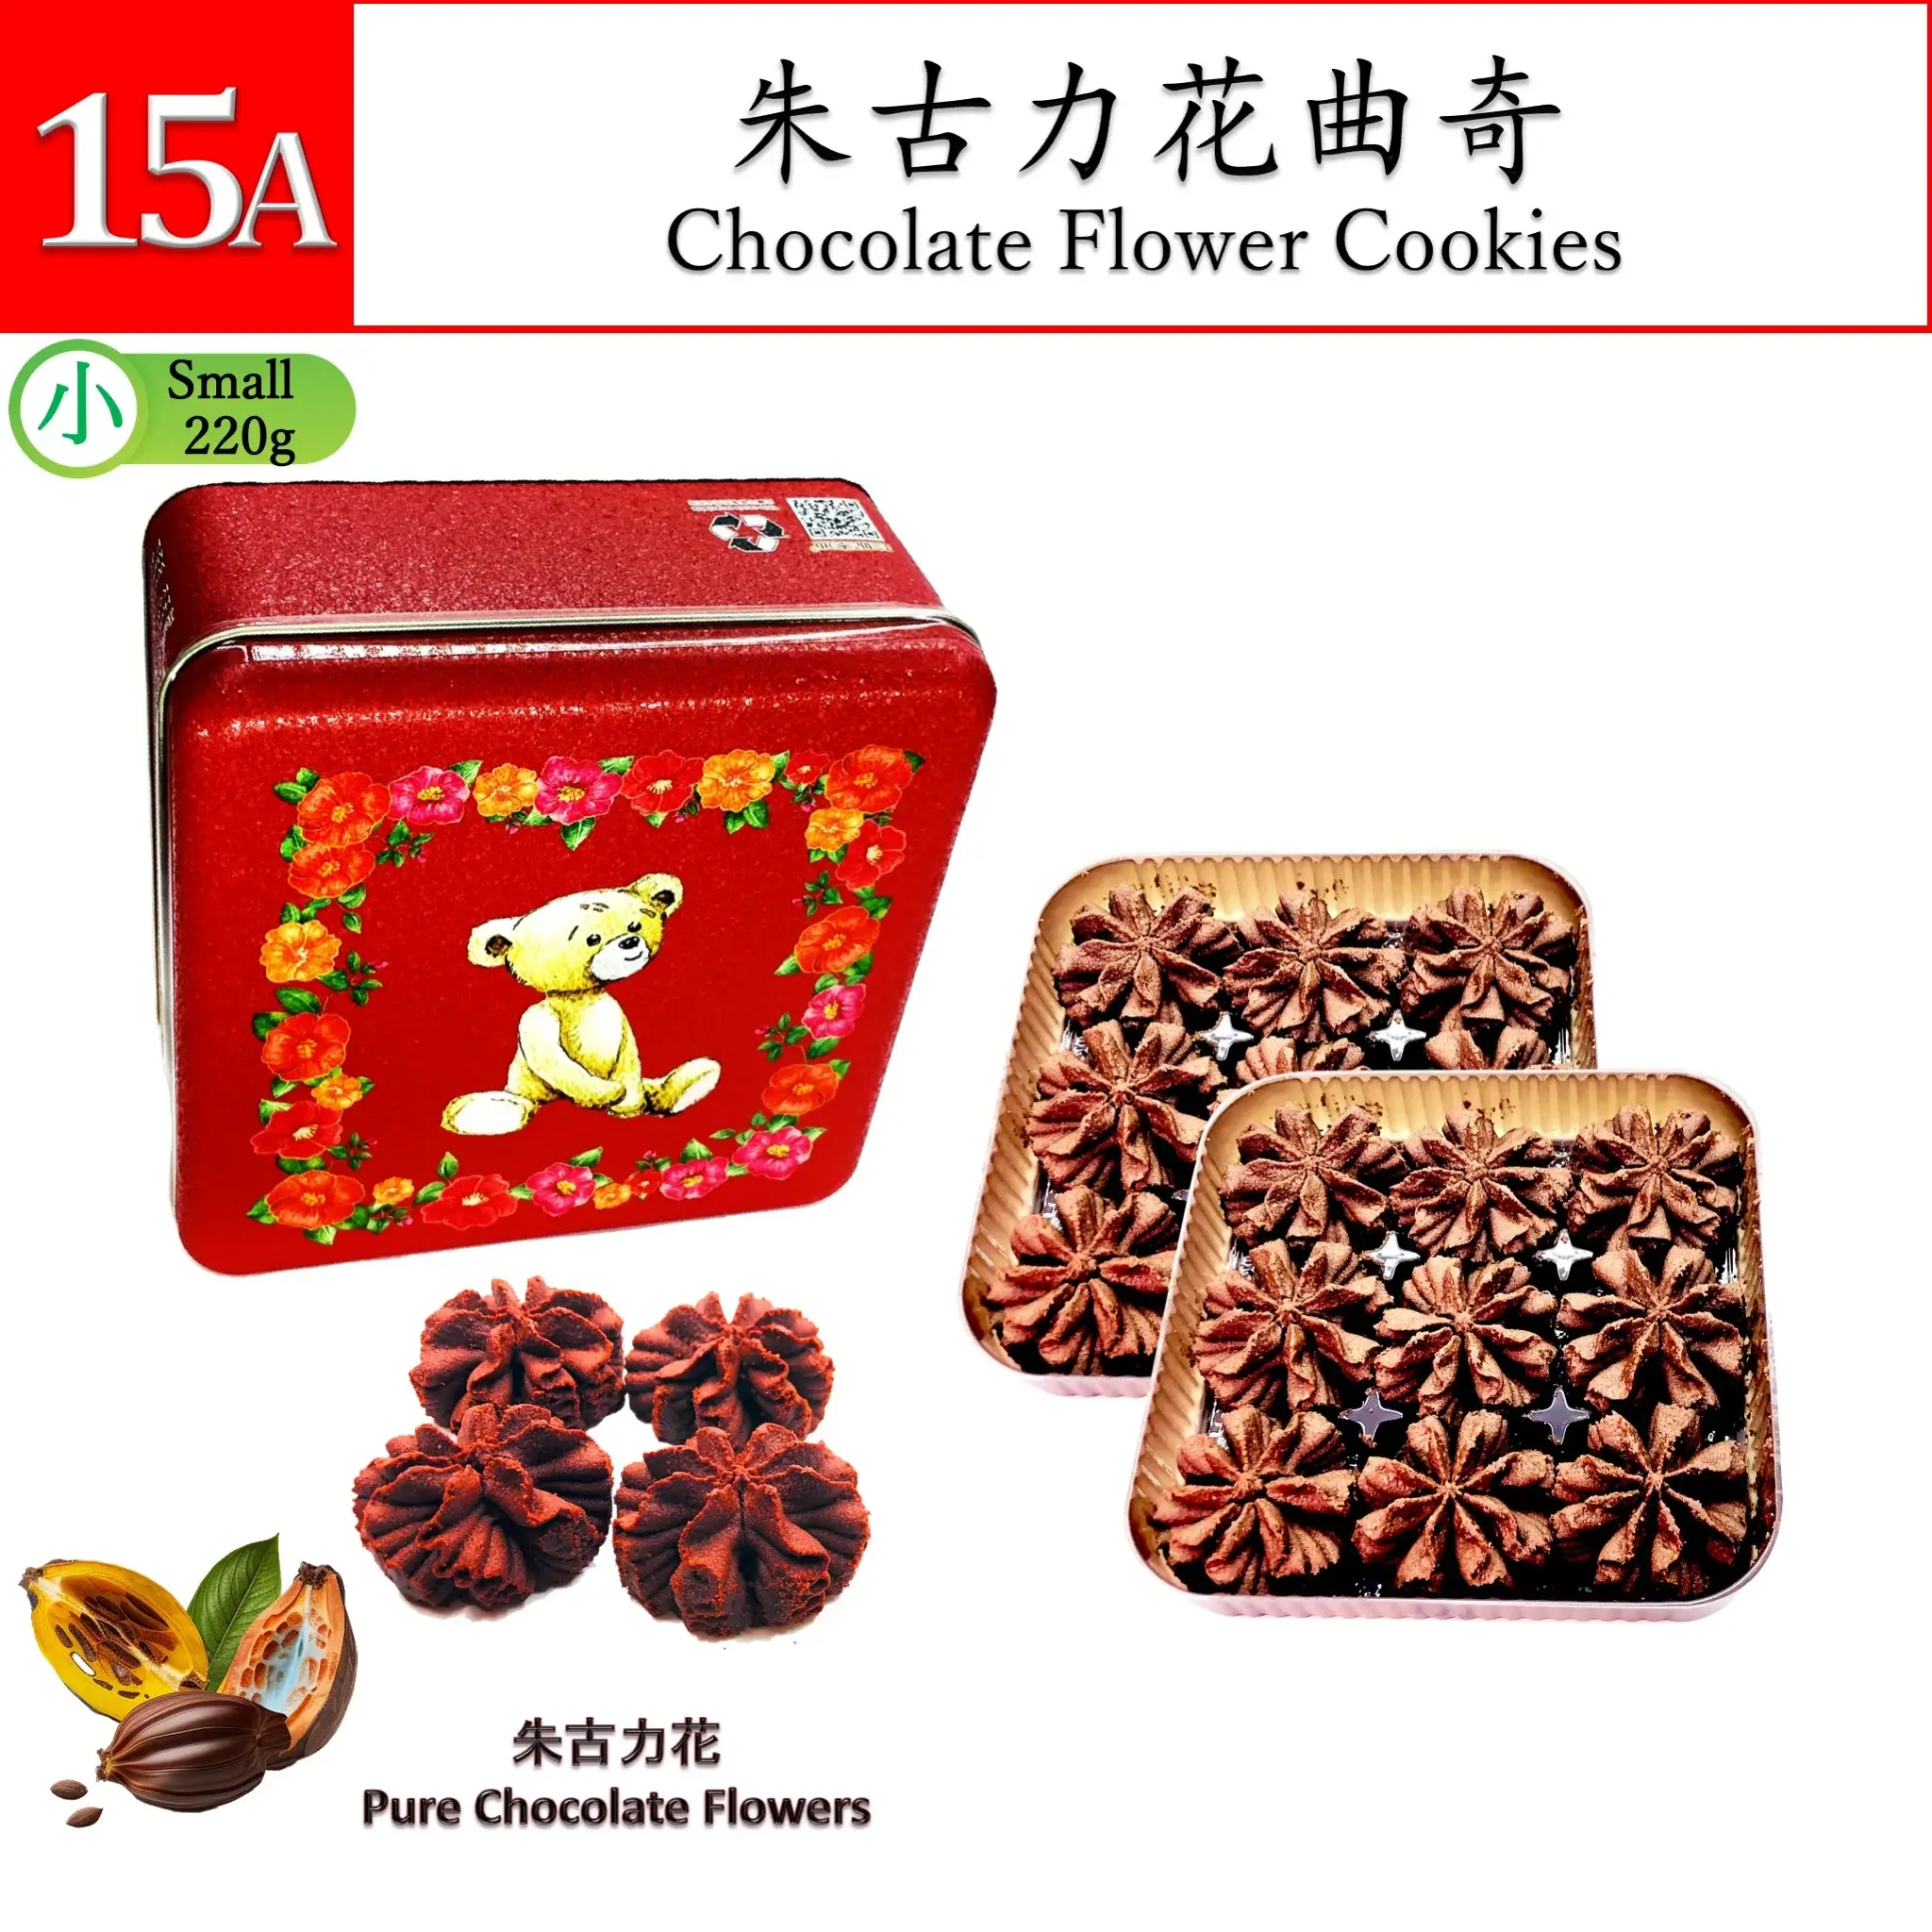 Chocolate Flower Square 220g (S)